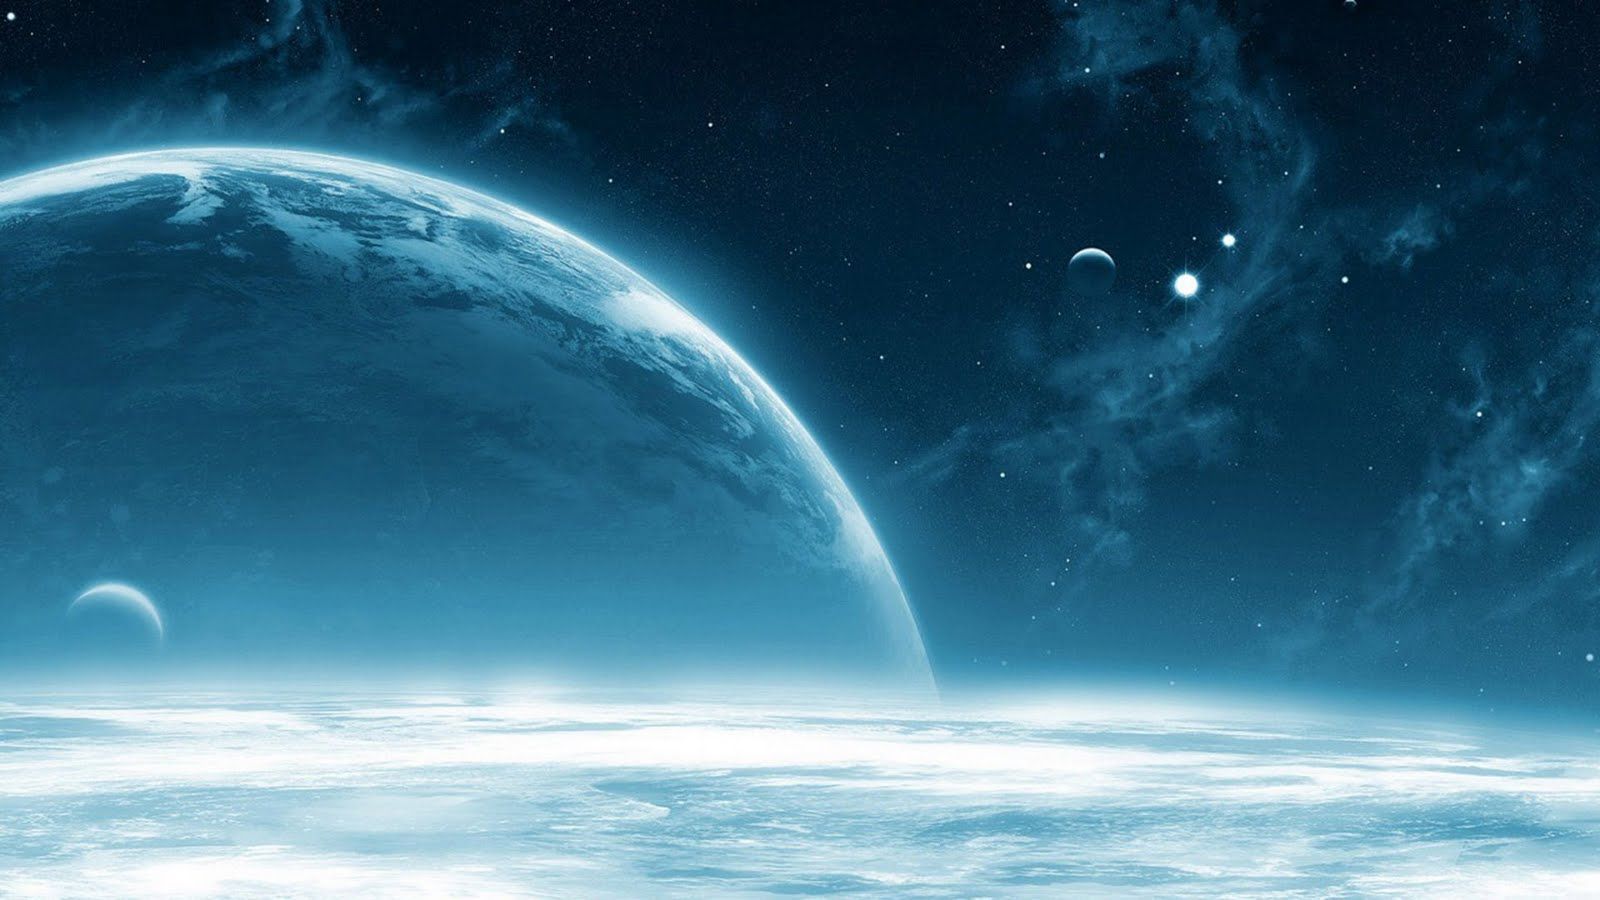 The Blue Planet Space Wallpaper